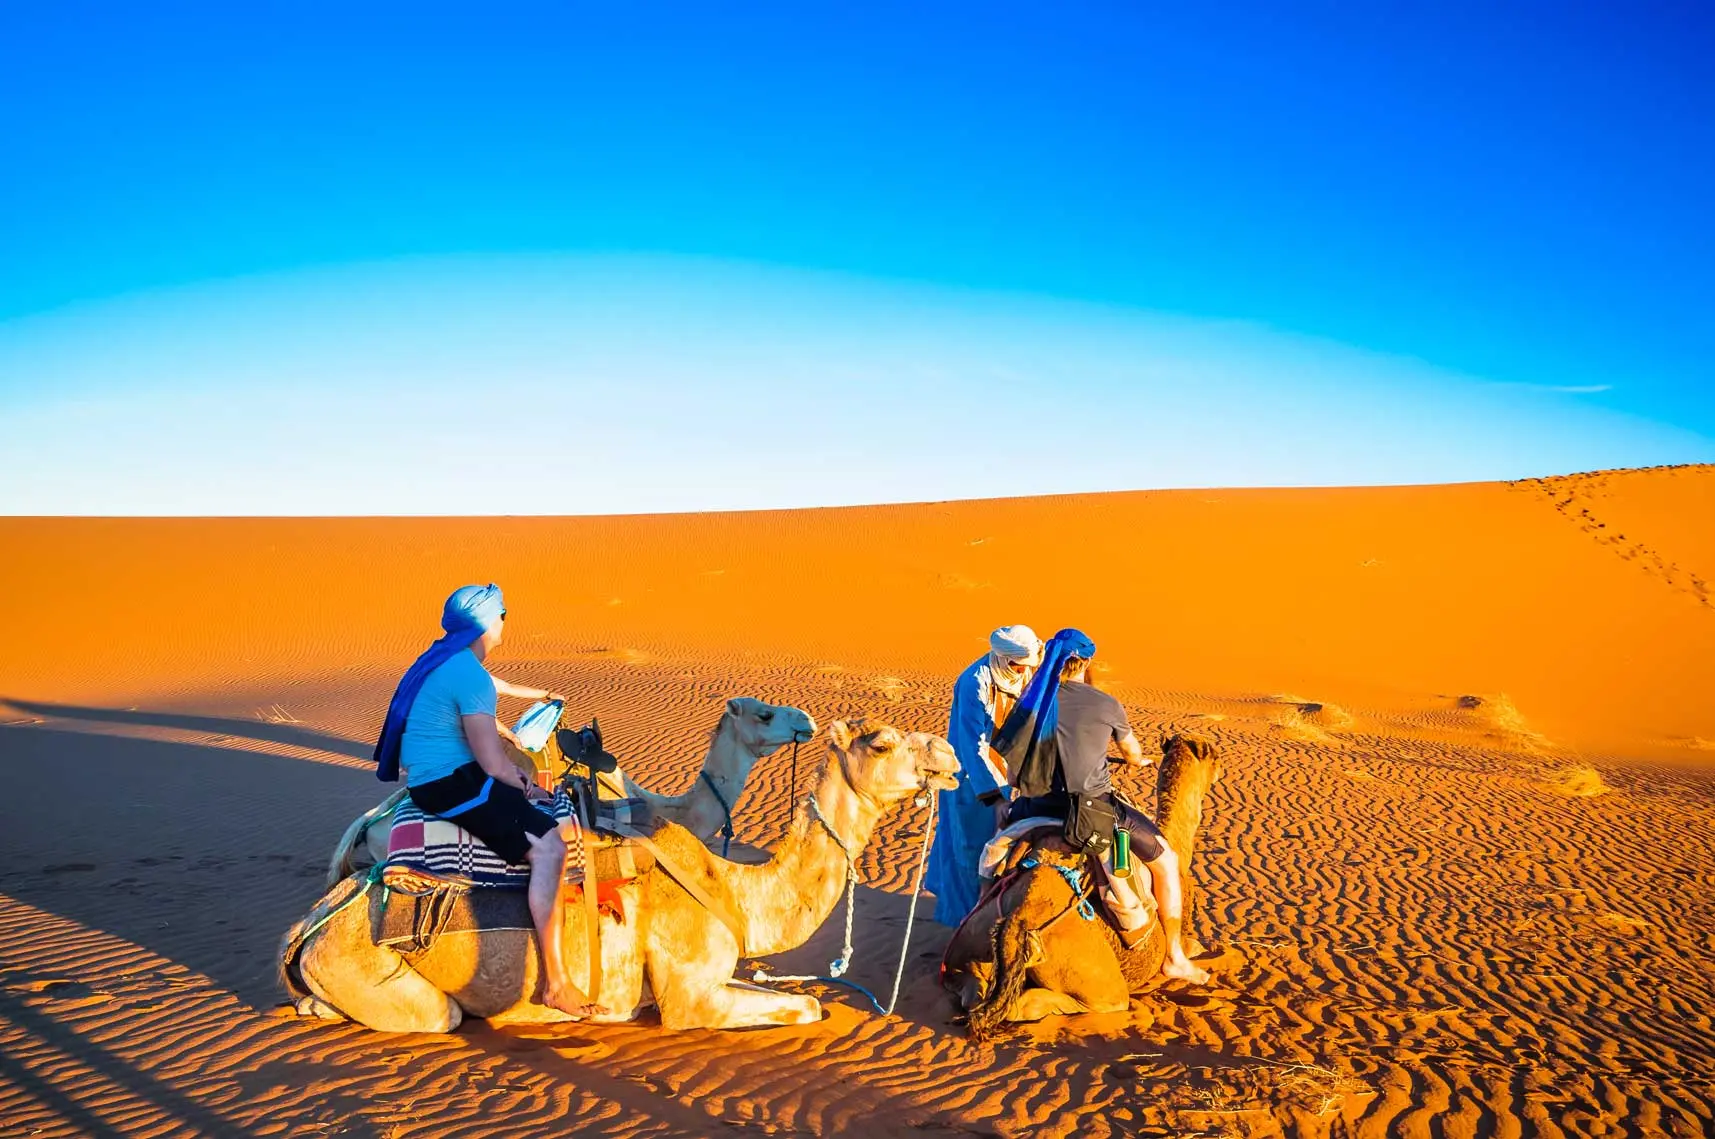 wild Mhamid Camel Trekking  country's largest dunes, its beautiful ochre, yellow and orange colours and daily changing landscape! Admire the sunrise and sunset, a breathtaking spectacle of light and shadow.let's start the tour of 5 days of Wild Mhamid Camel Trekking 